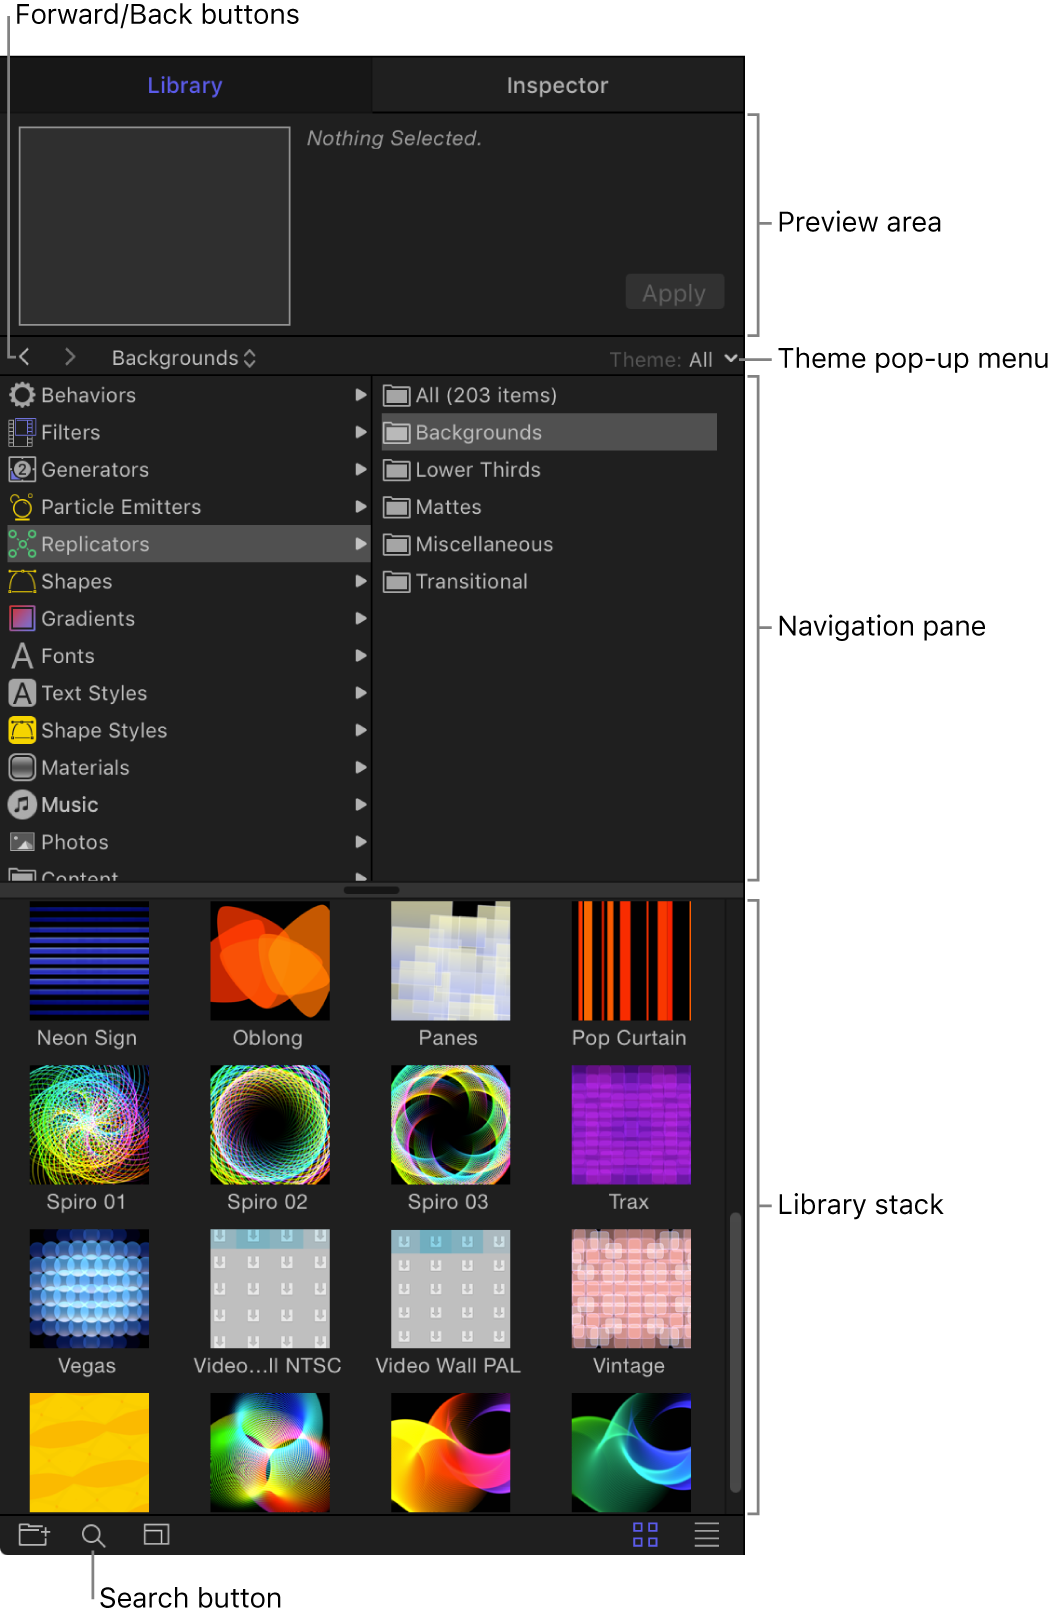 Areas of the Library: Preview area, forward and back buttons, Theme pop-up menu, navigation pane, Library stack, and the search button